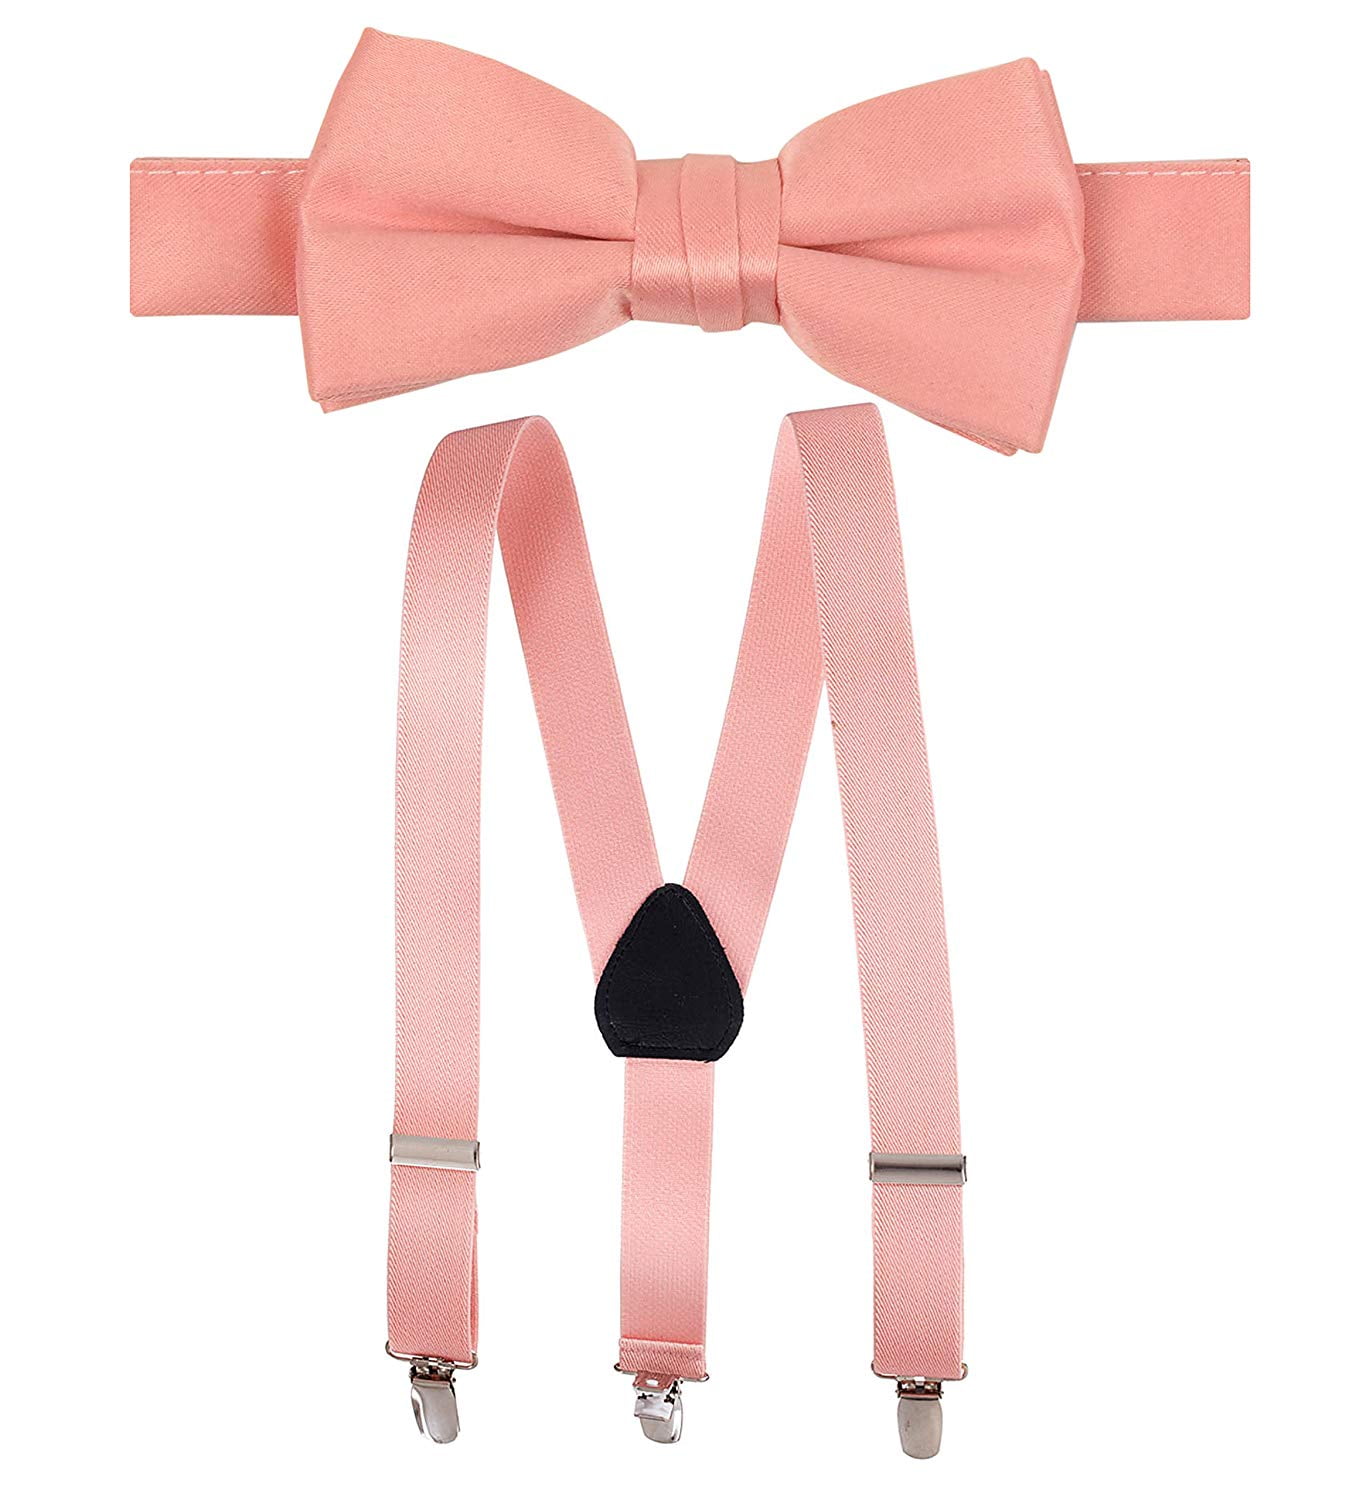 New KID'S BOY'S 100% Polyester Pre-tied Bow tie only light pink formal wedding 